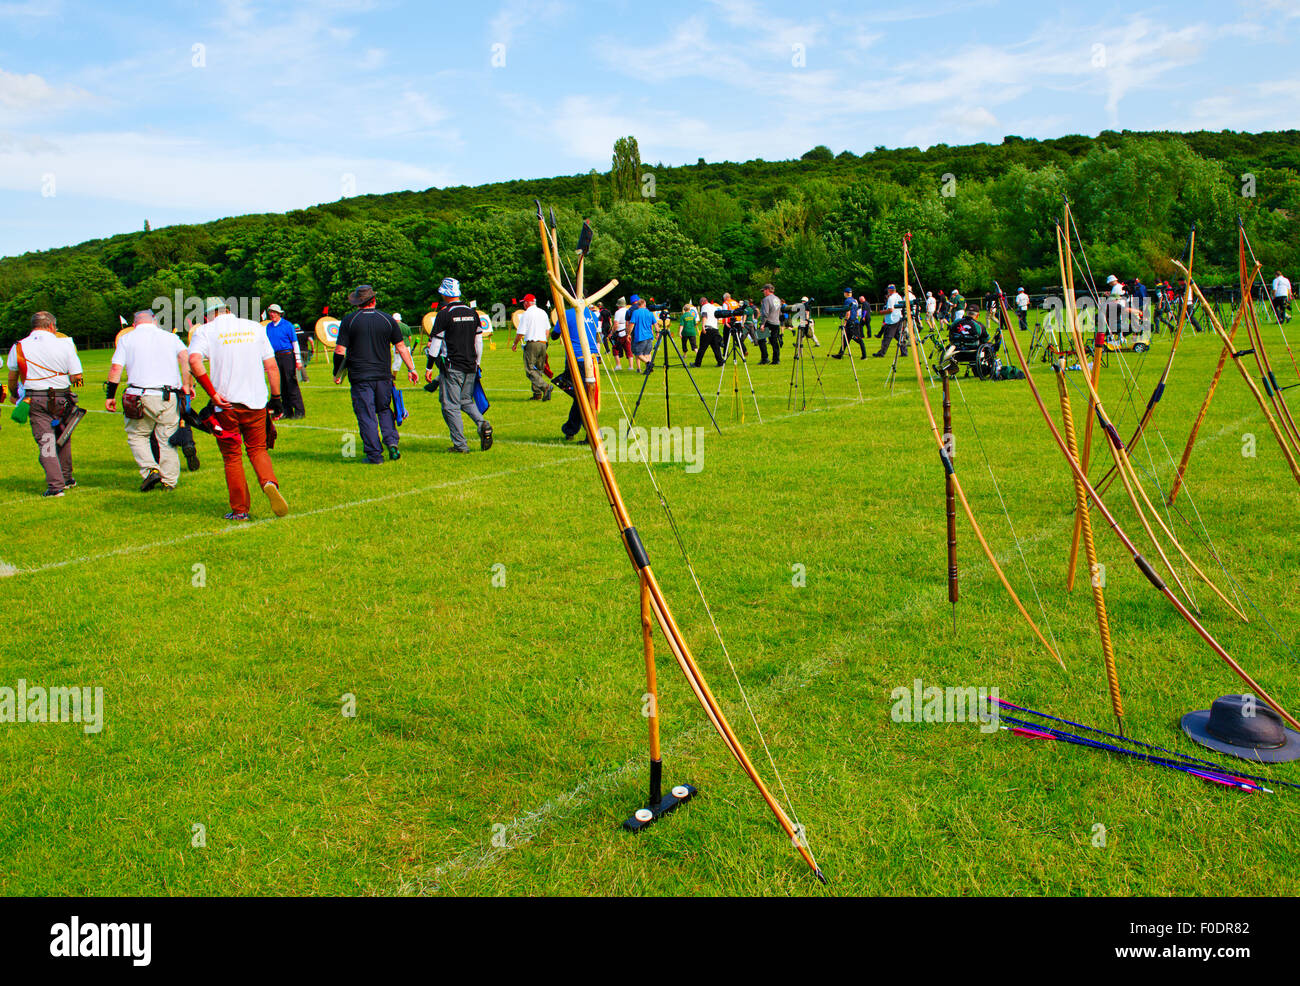 Archery competition, row of traditional longbows lined up behind shooting line with archers walking to targets to retrieve arrow Stock Photo